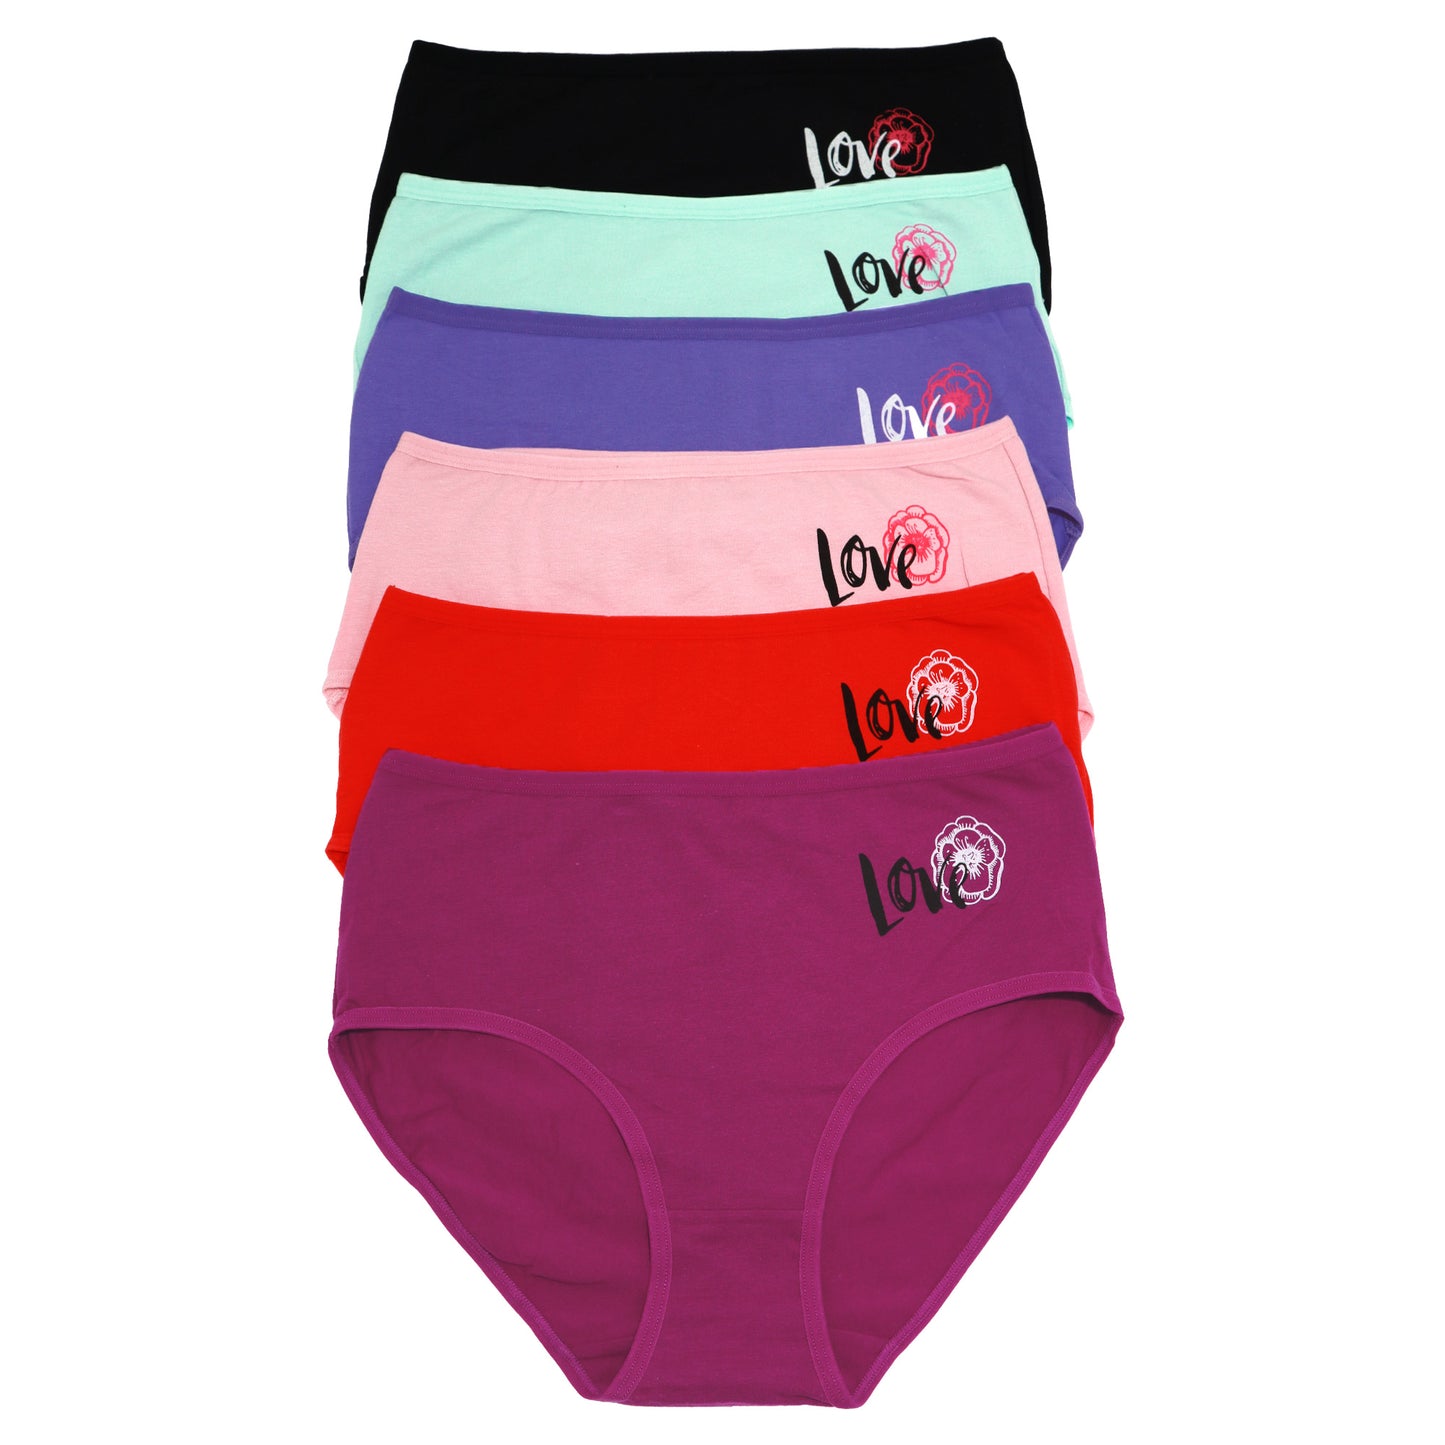 Cotton Mid-Rise Briefs with Love Print Design (6-Pack)